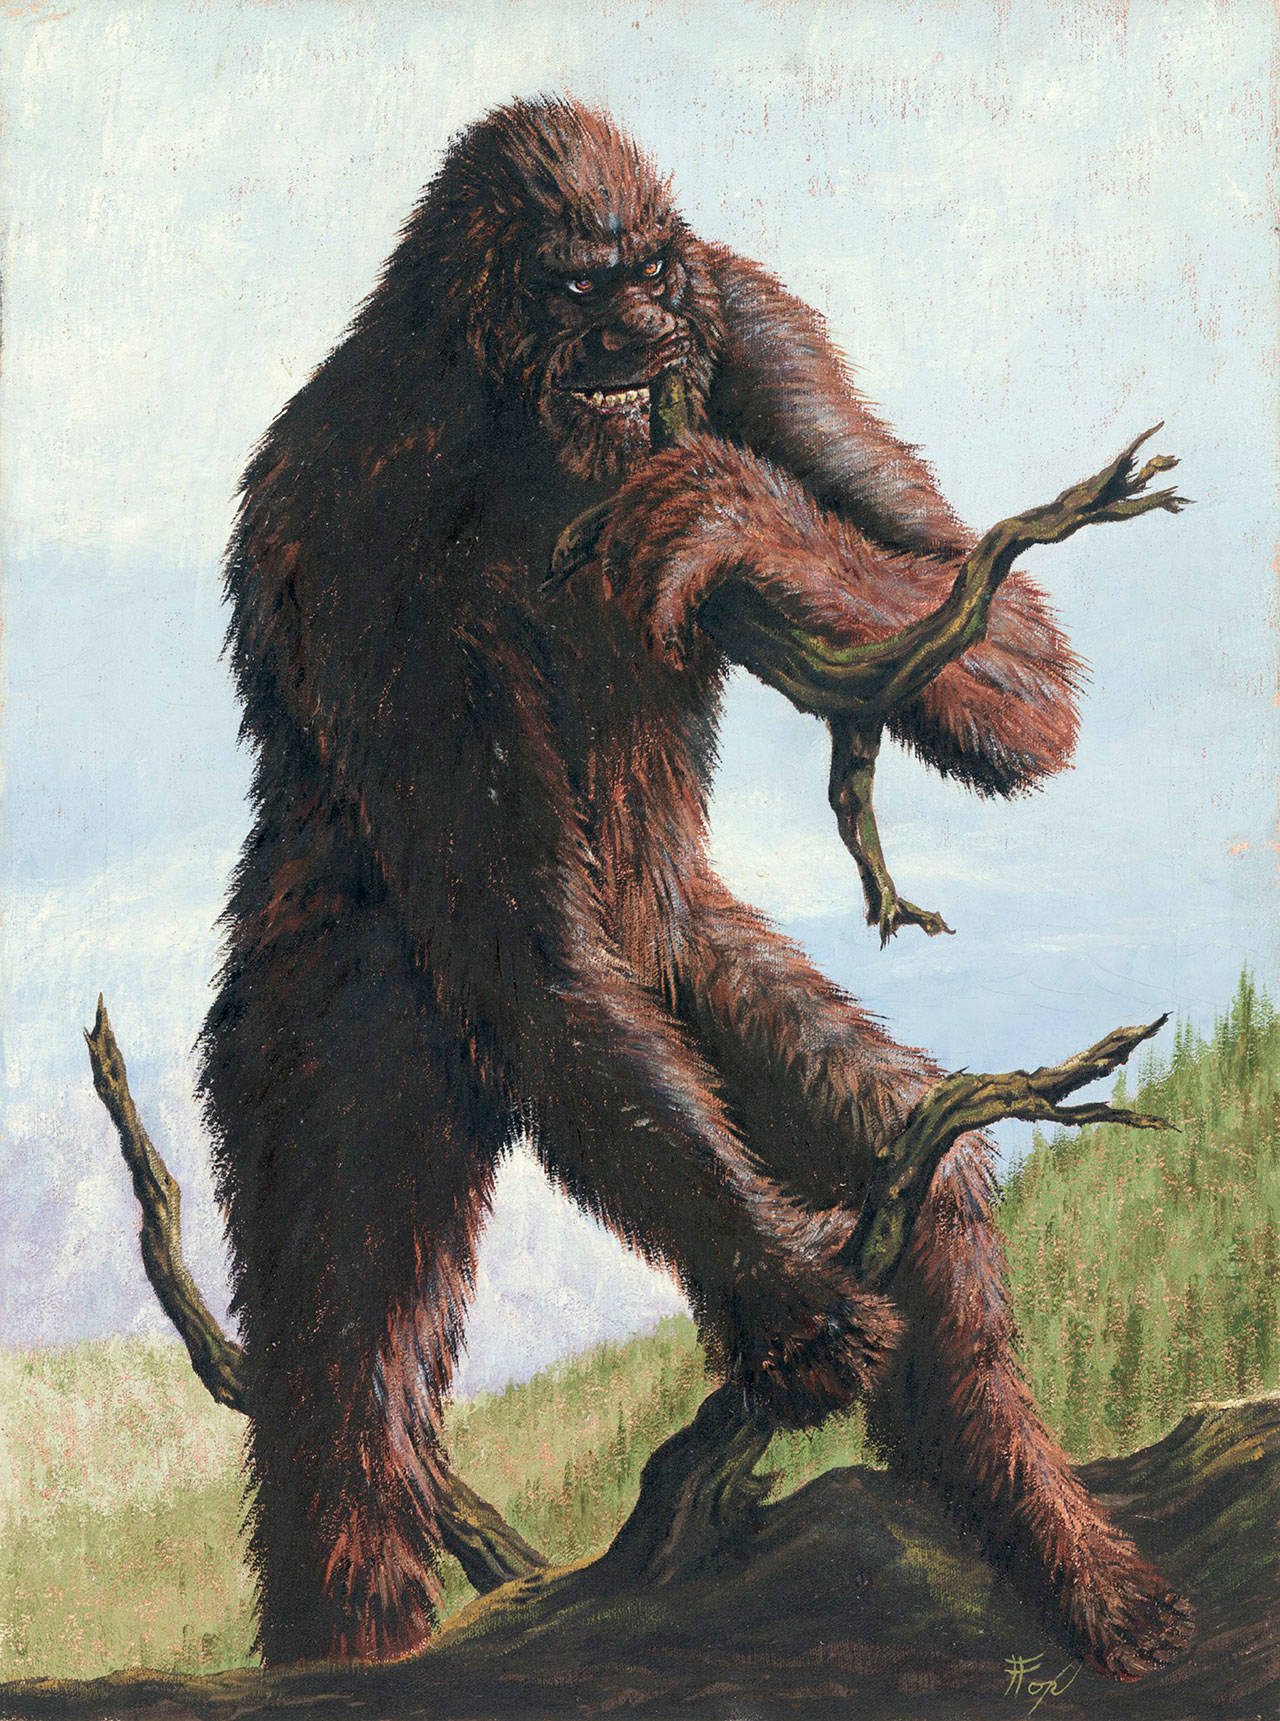 This artist rendering of a Sasquatch gives an idea of what researchers like Ron Morehead encountered in their years of searching for the elusive beasts. Photo courtesy of Ron Morehead